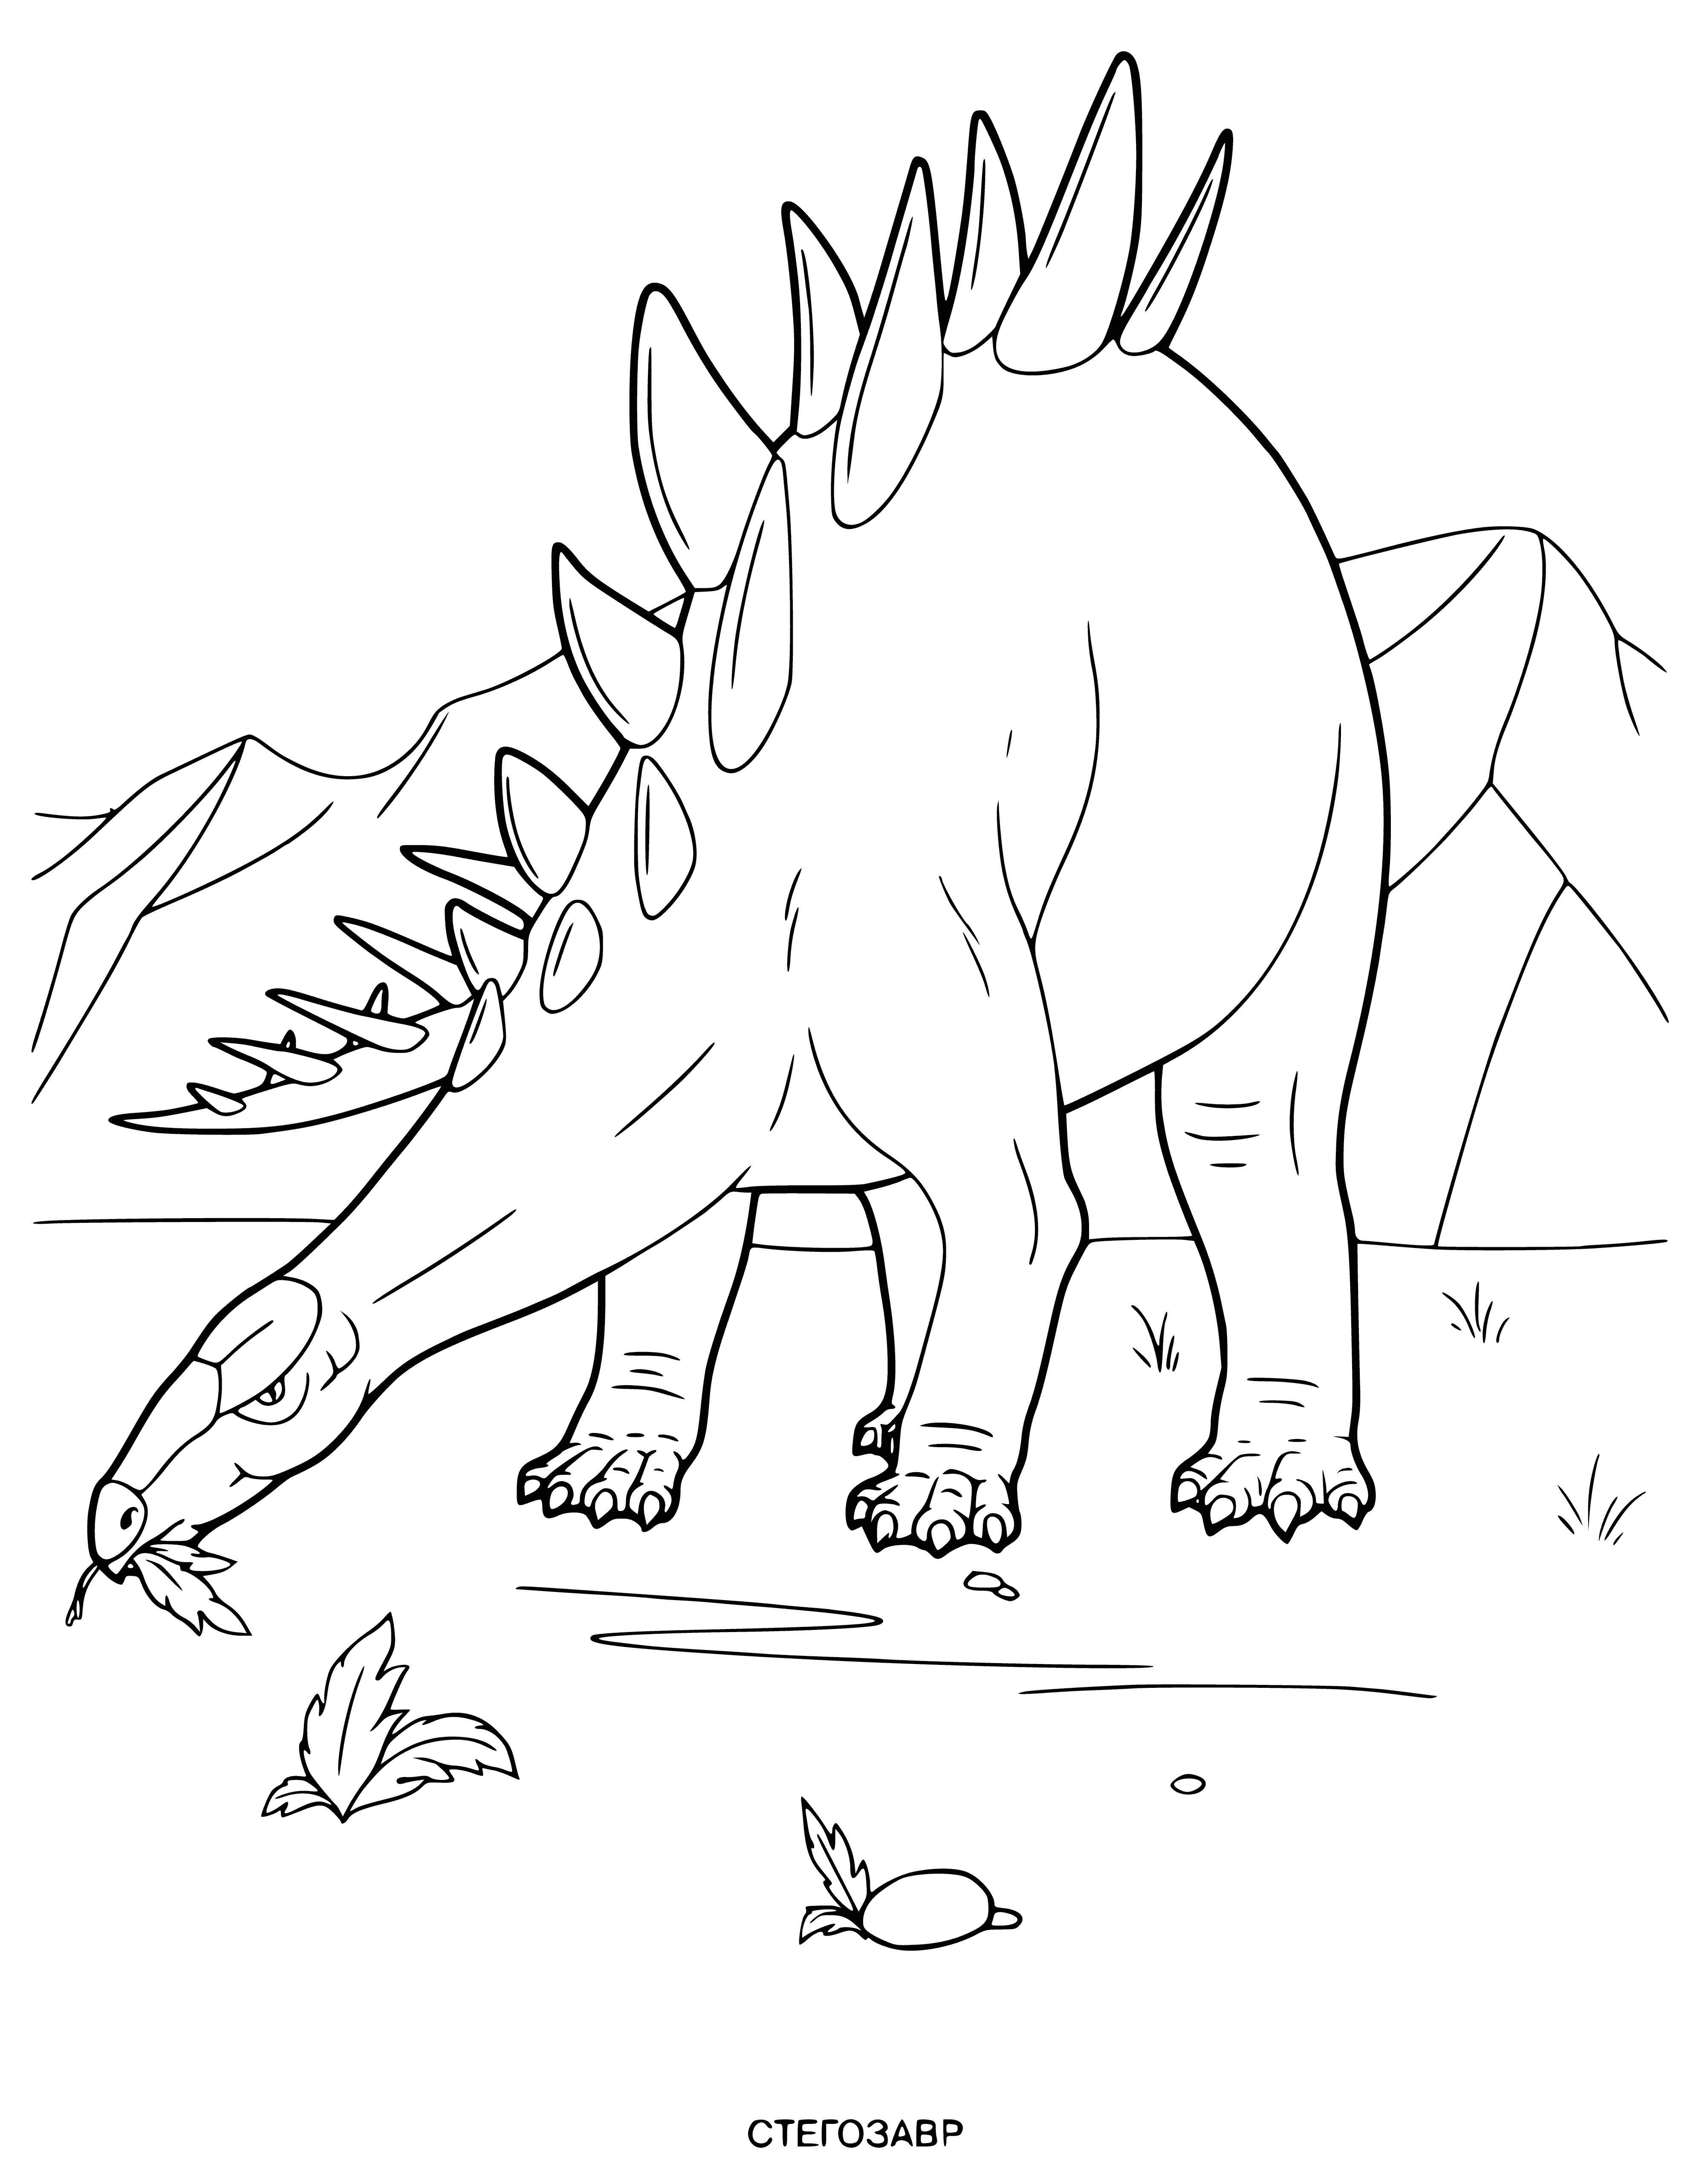 coloring page: Huge green dinosaur with long neck/tail near river, head tilted down. Eyes closed, sharp teeth visible in open mouth.